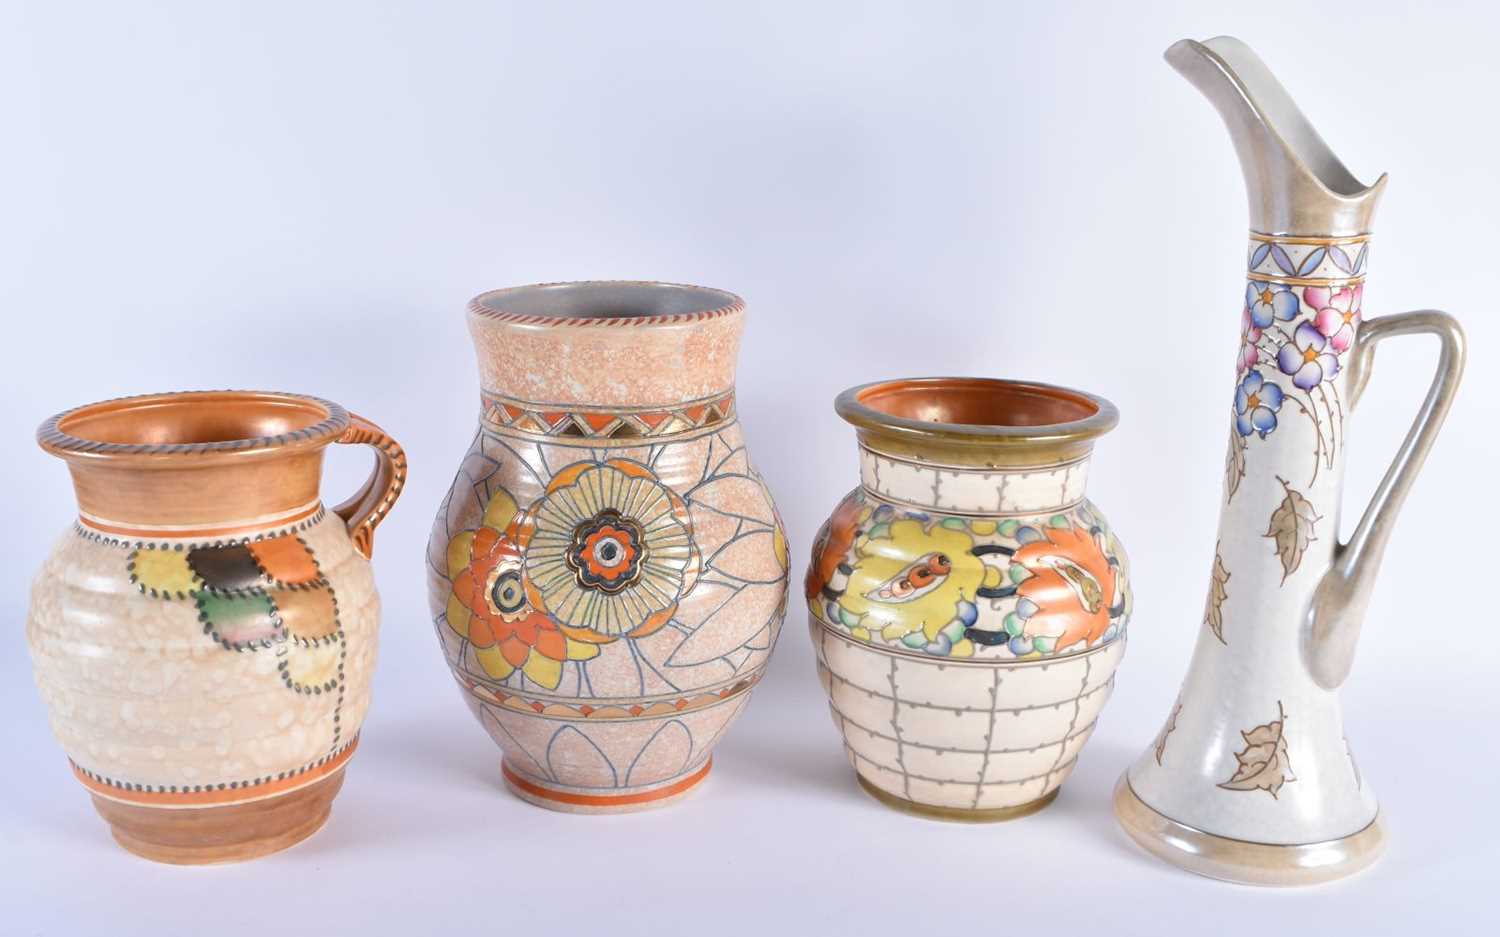 THREE LARGE ART DECO ENGLISH POTTERY VASES together with a ewer, bursley ware etc. Largest 38.5 cm